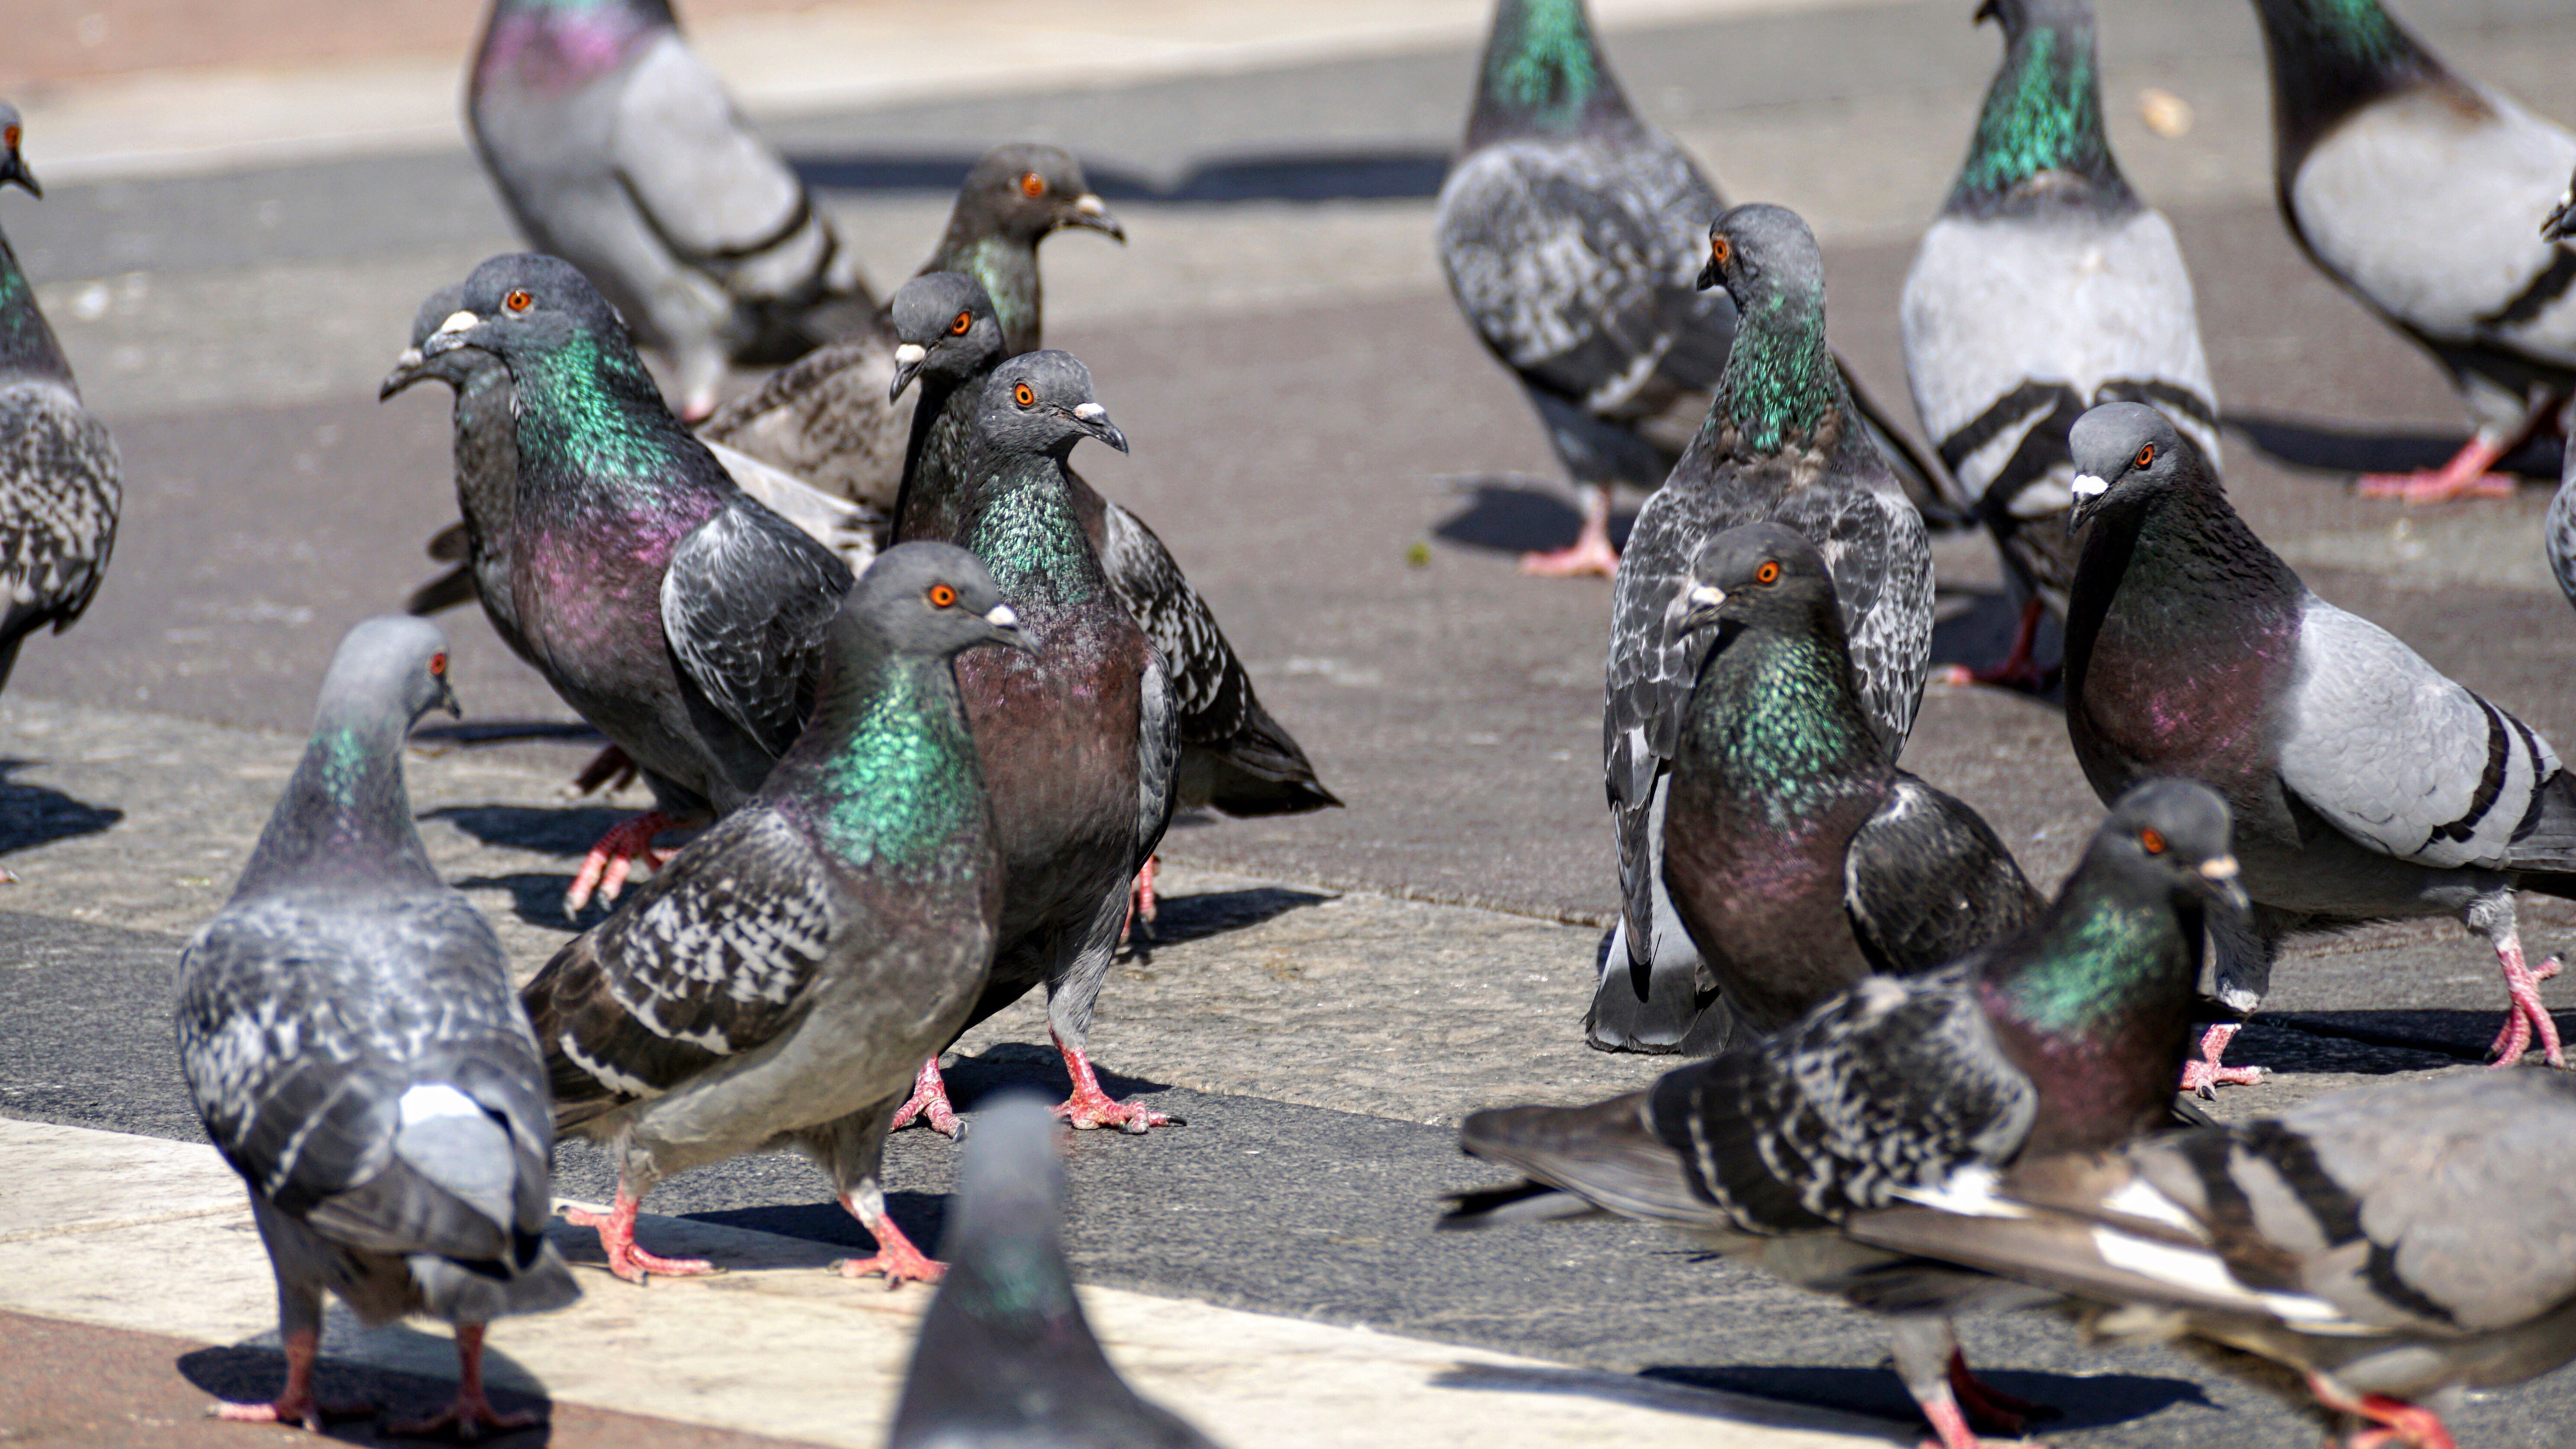 Pigeons learn to solve problems like artificial intelligence